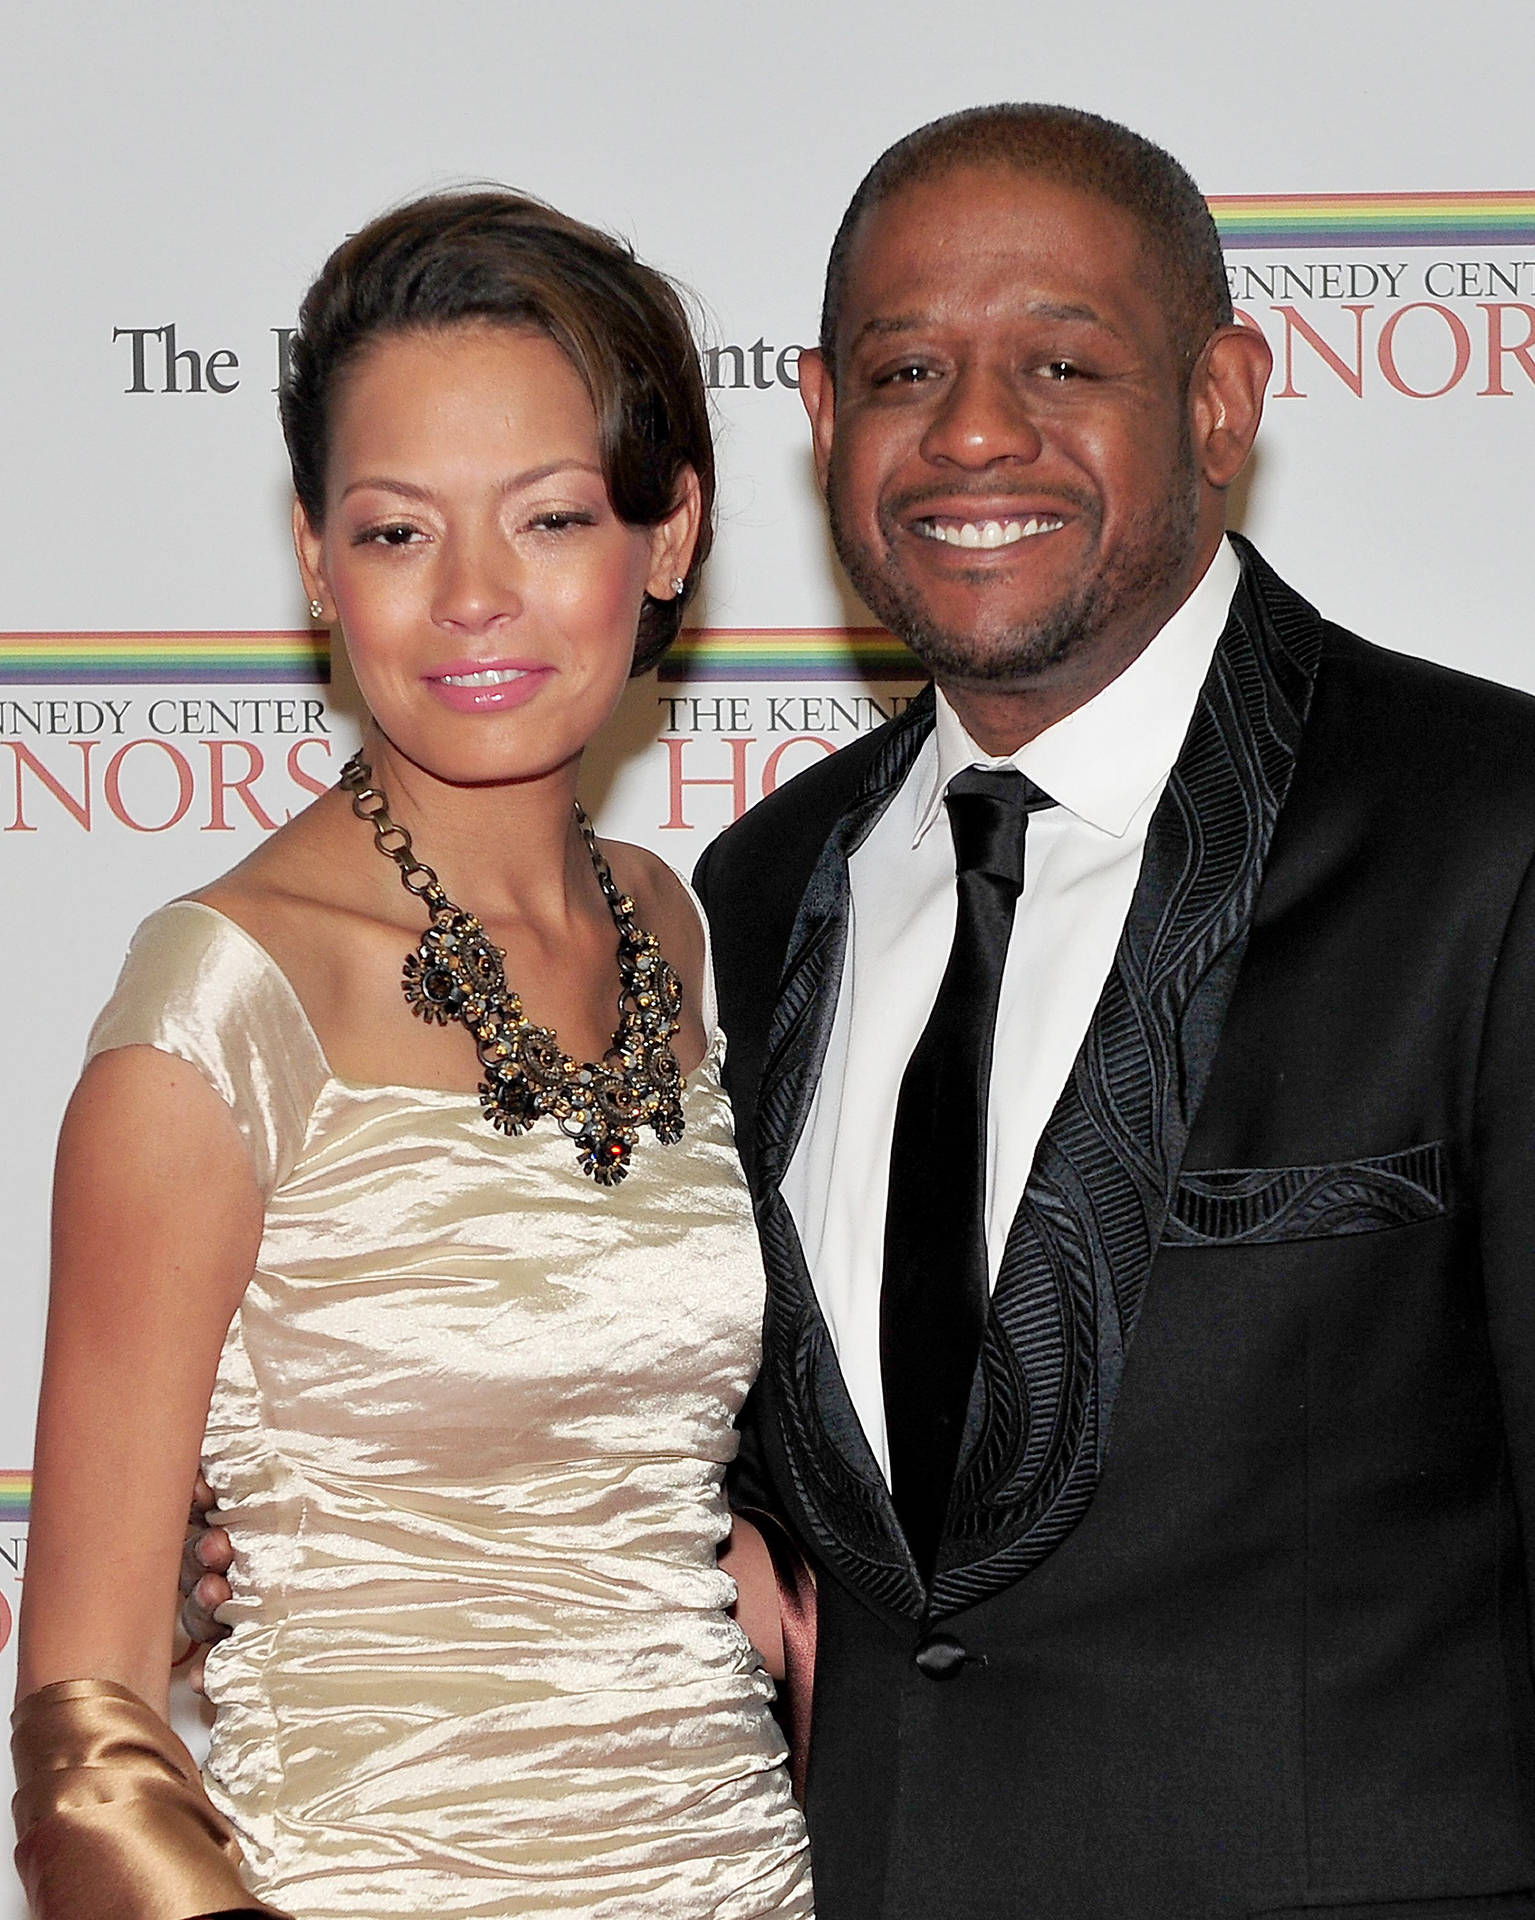 Hollywood Star Forest Whitaker alongside wife Keisha Nash at a public event. Wallpaper